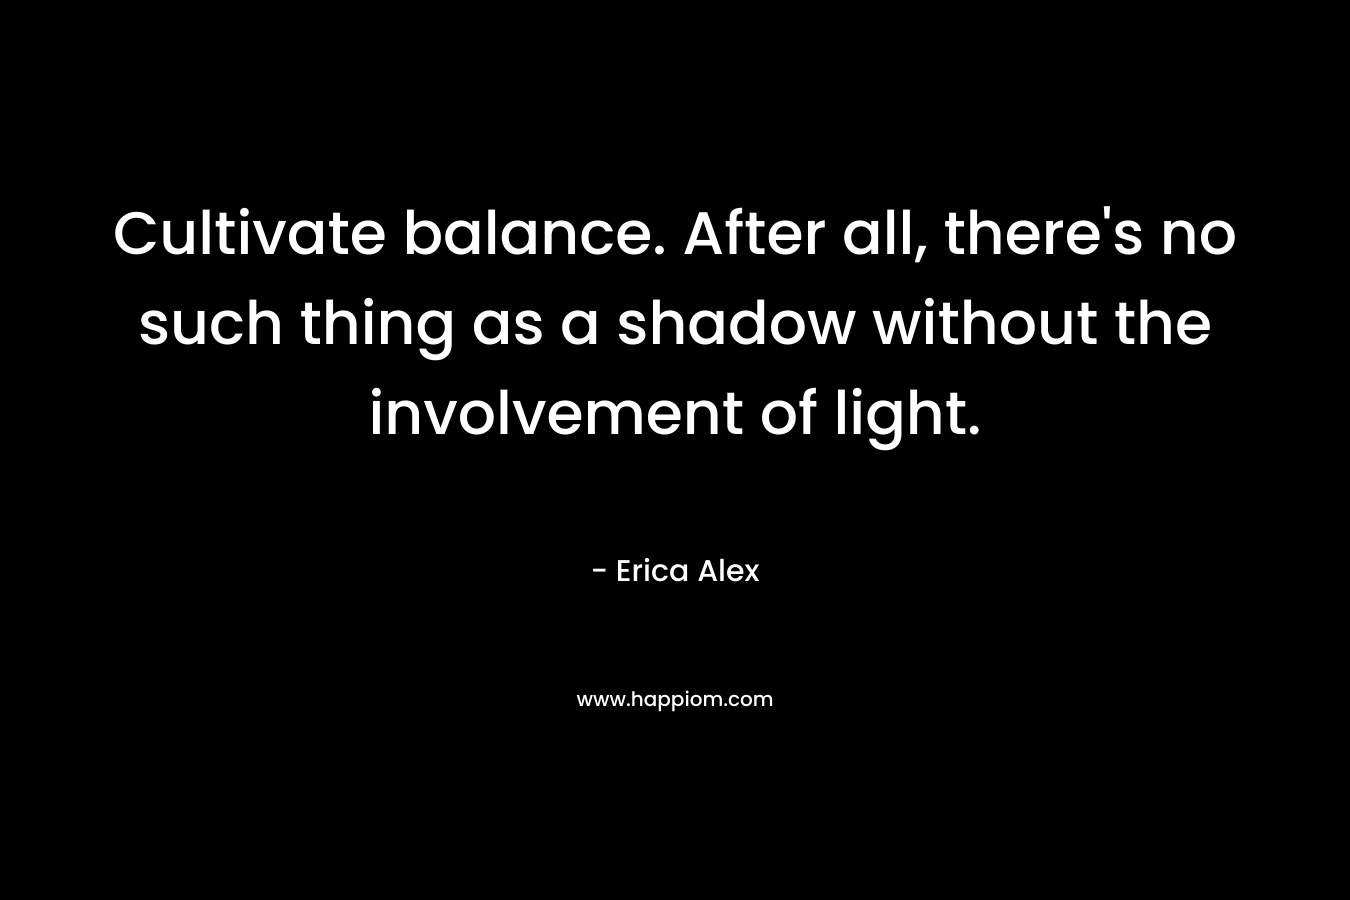 Cultivate balance. After all, there's no such thing as a shadow without the involvement of light.